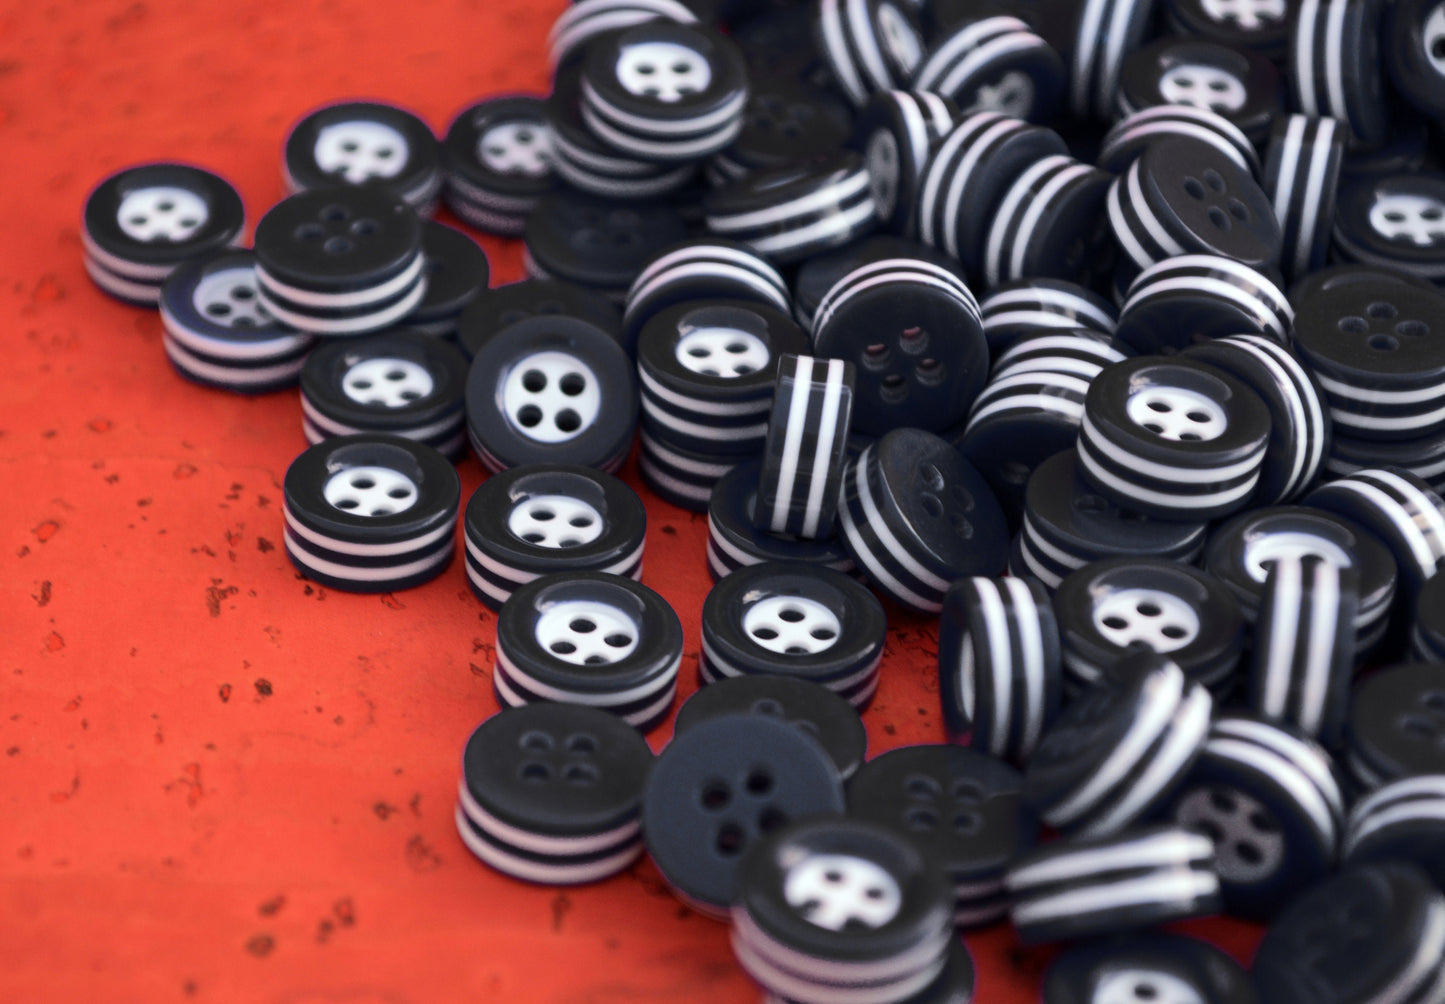 50 white and black STRIPED BUTTONS - 5mm thick! - choose from sizes 18L 16L - great quality - Made in ITALY